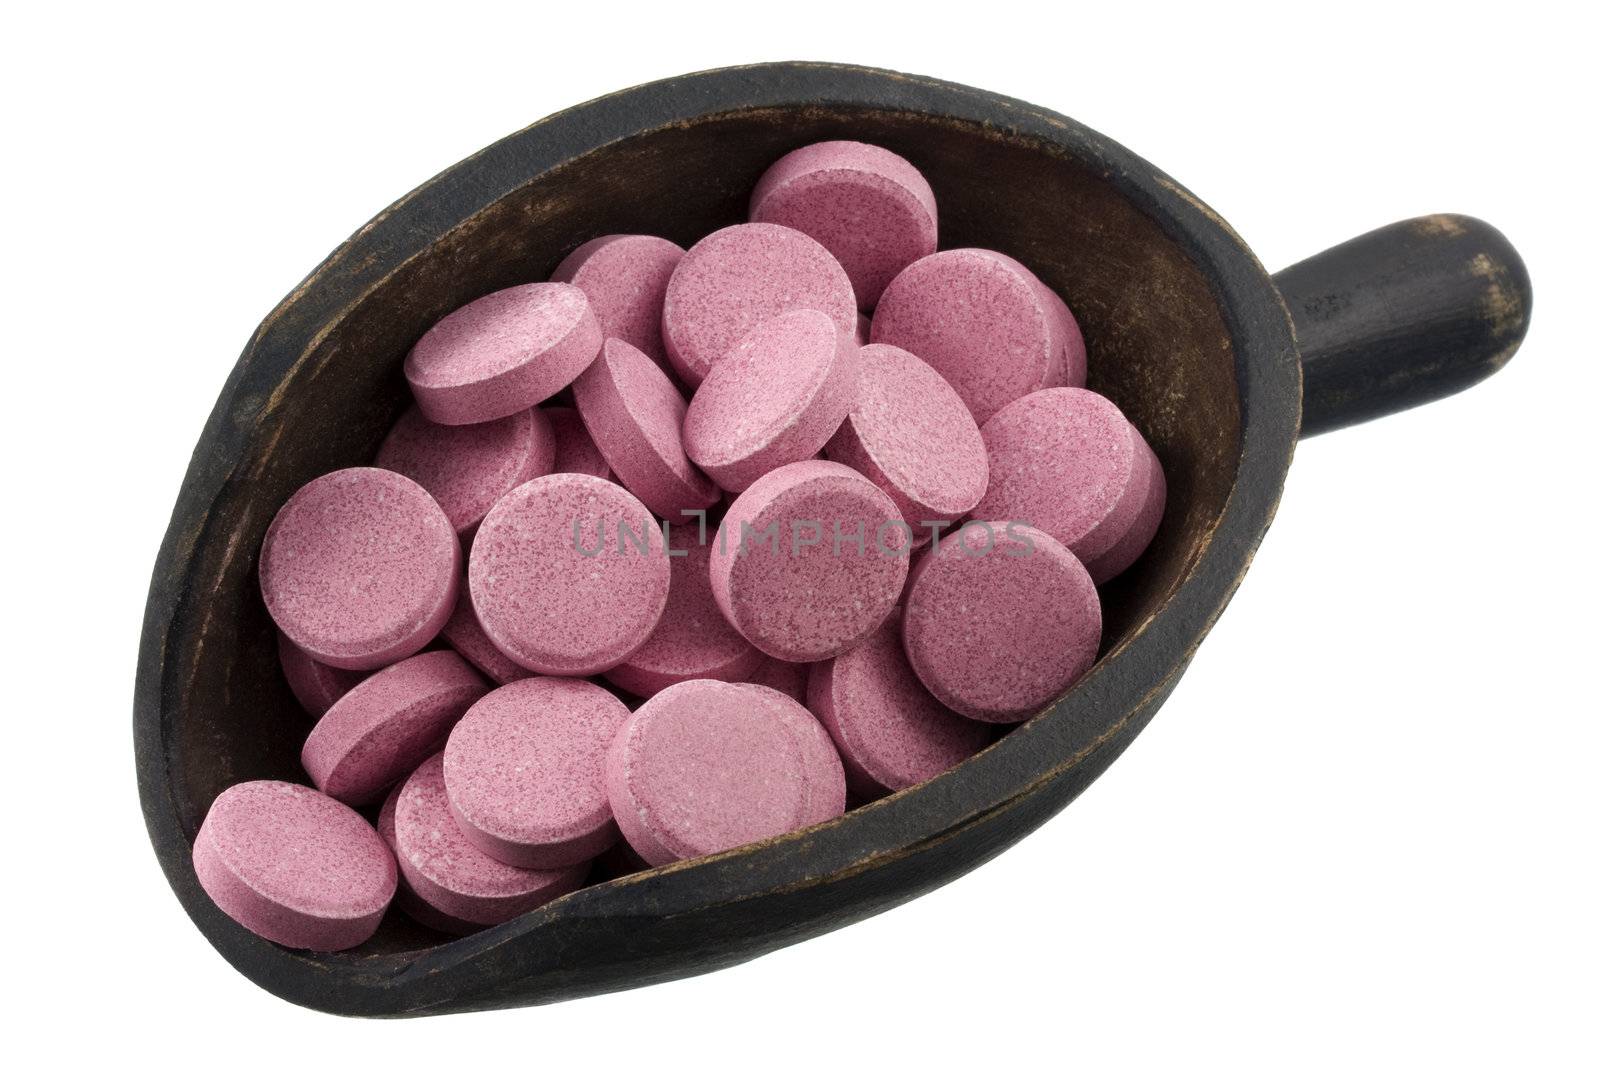 pink pills (tablets) of vitamin, dietary supplement or stomach medicine on a rustic, wooden scoop, isolated on white